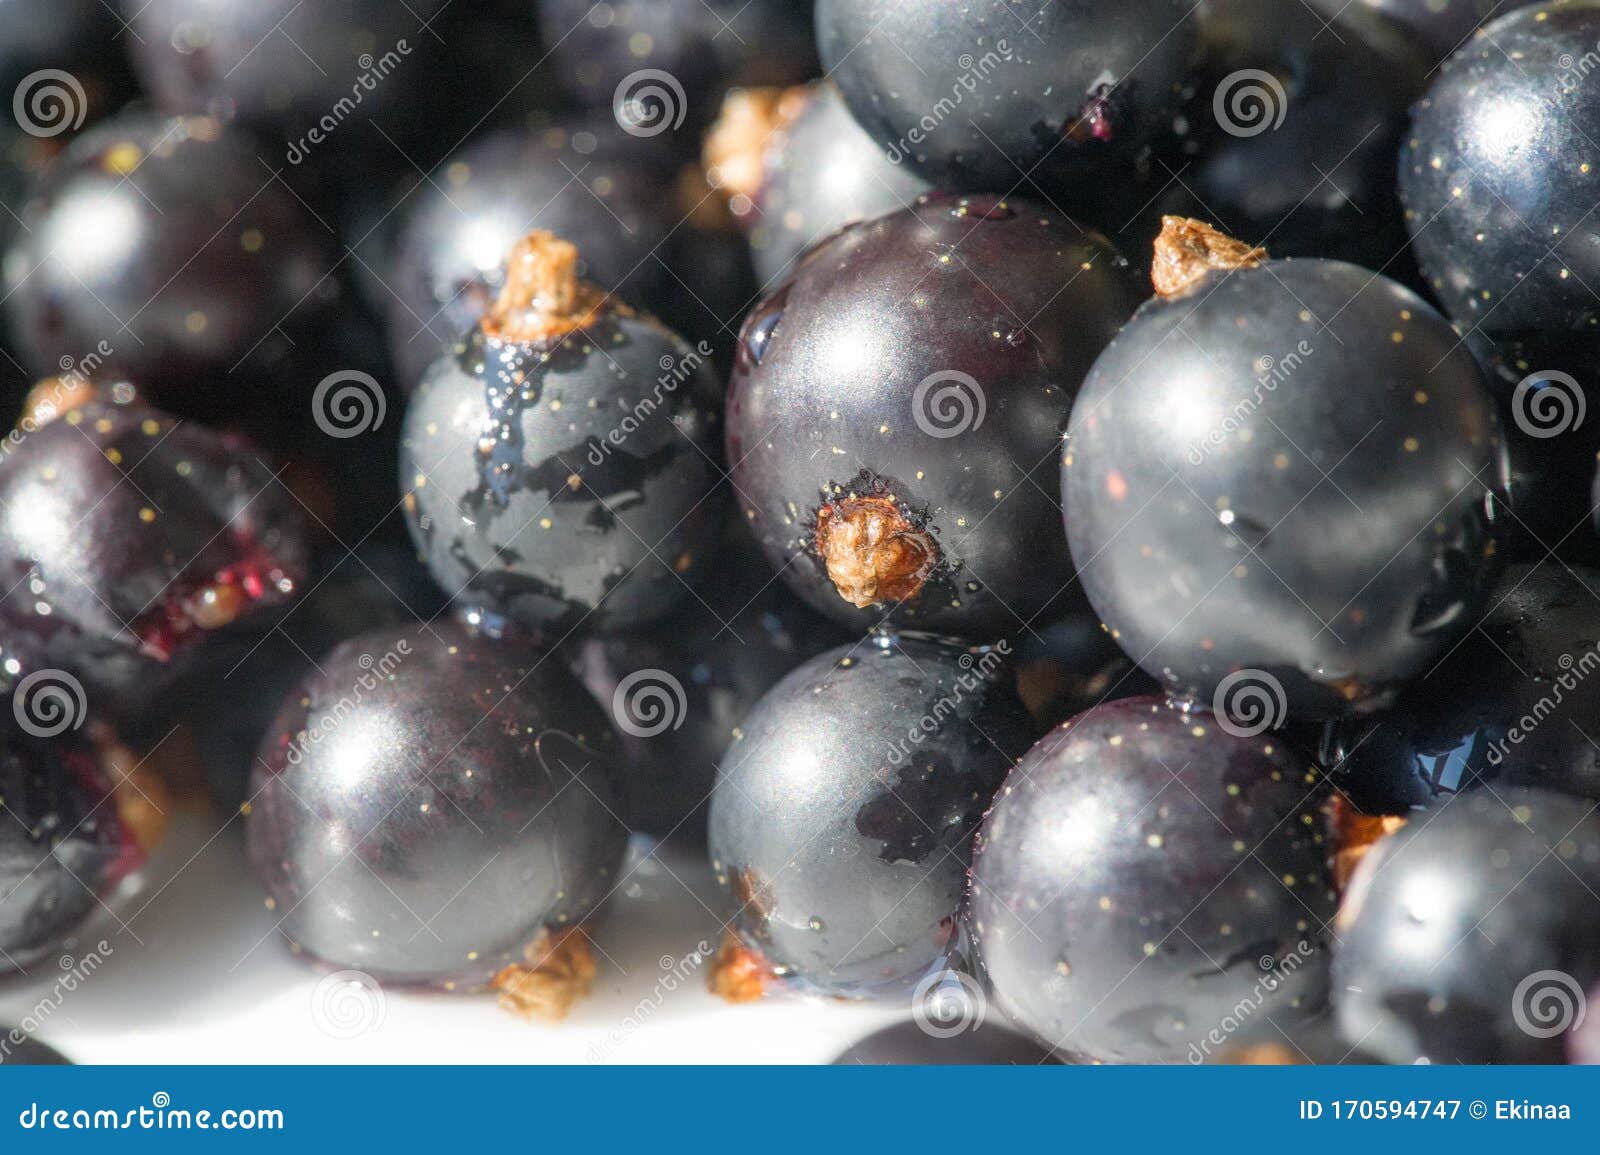 black currant, blackcurrant, blackberry. vitamin c and polyphenol phytochemicals.  they are used to make jams, jellies and syrups